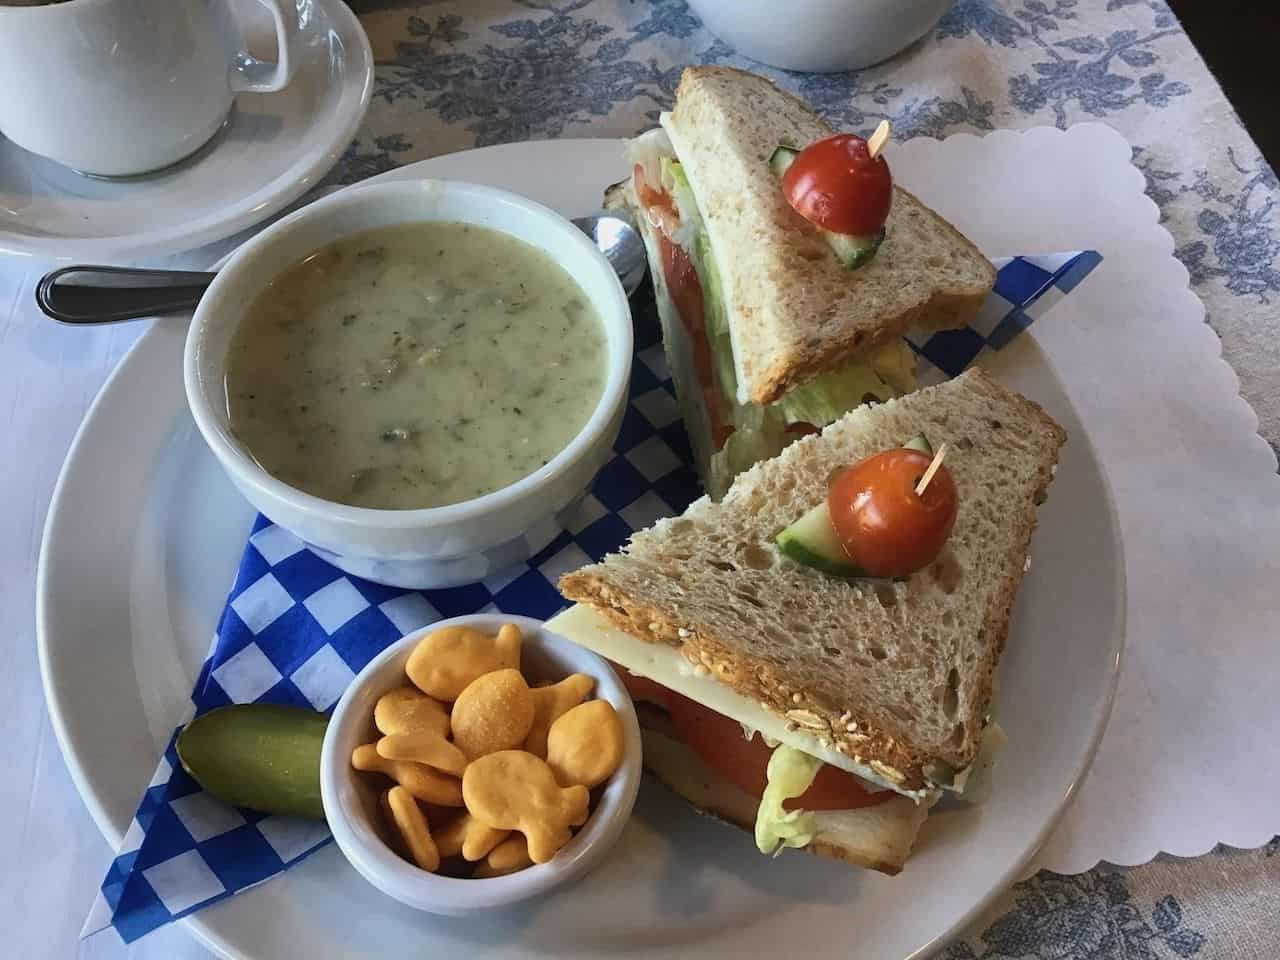 Kilby Cafe lunch we enjoyed during out stay at this historic site in Harrison Mills BC